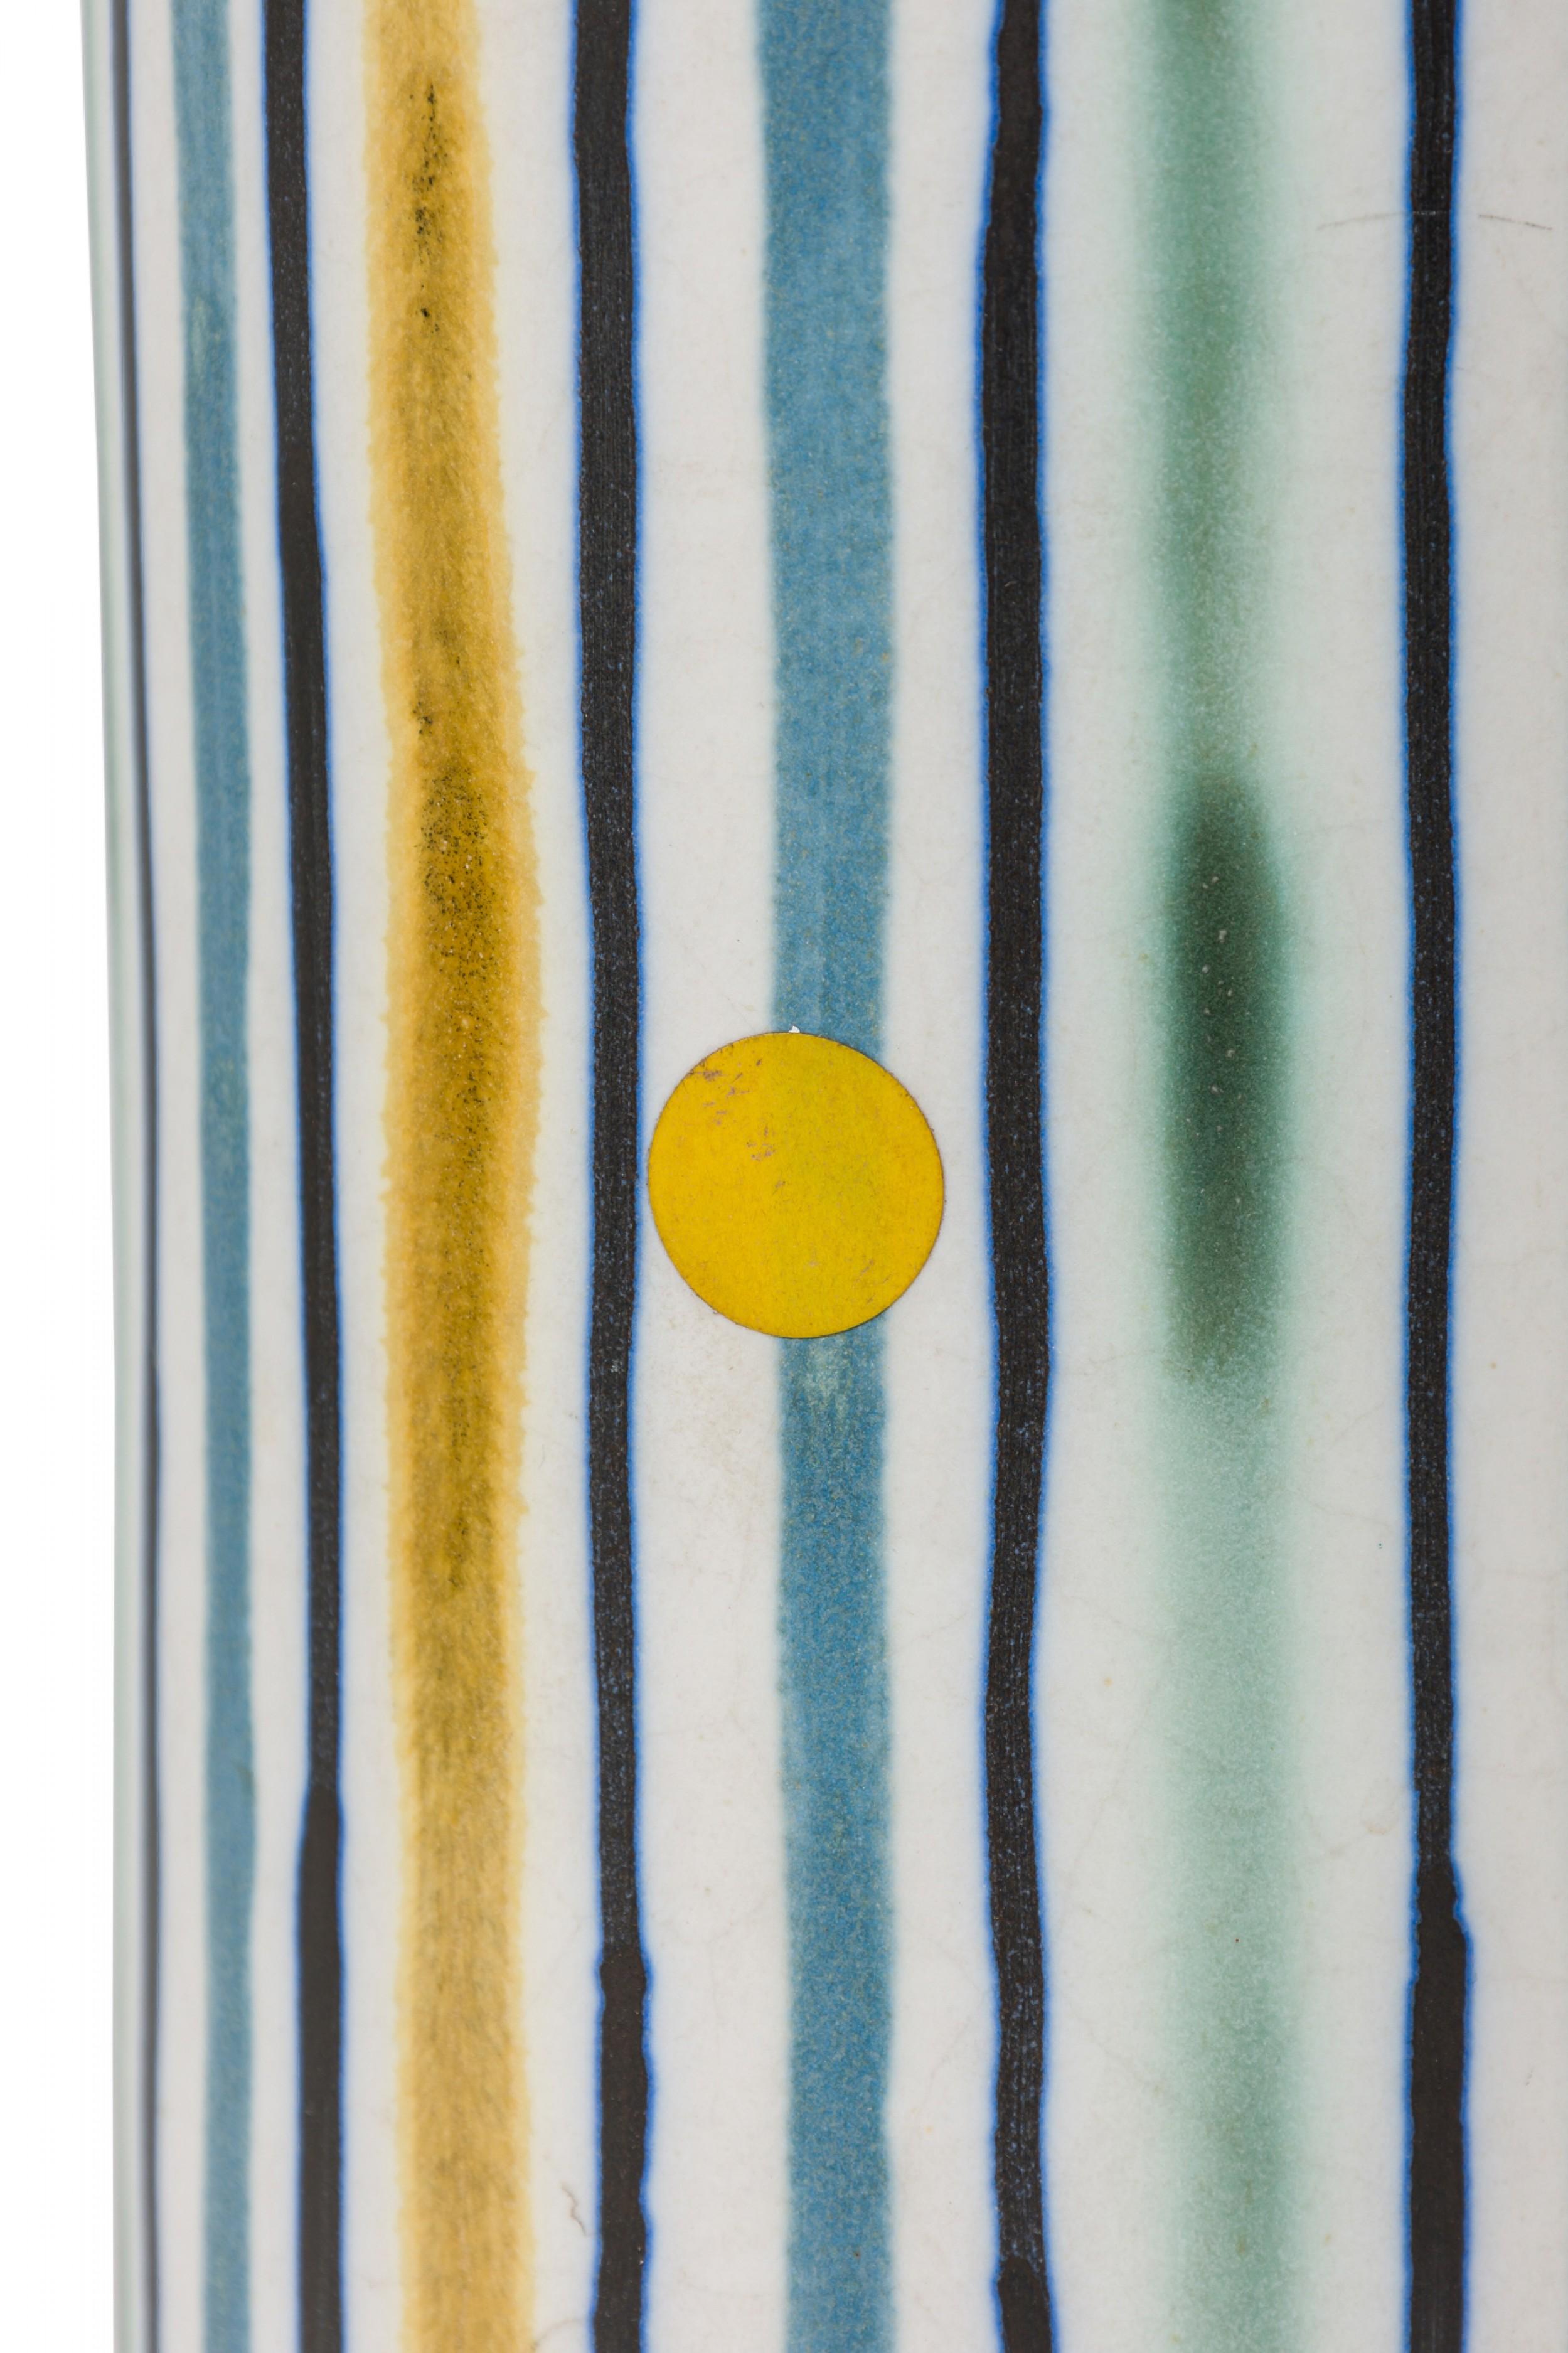 Mid-Century Danish ceramic table lamp (Model no. 302) in tall cylindrical form with tapered neck leading to an extended functioning brass light switch socket, the body glazed in a matte finish with hand painted blue, brown, yellow and white vertical